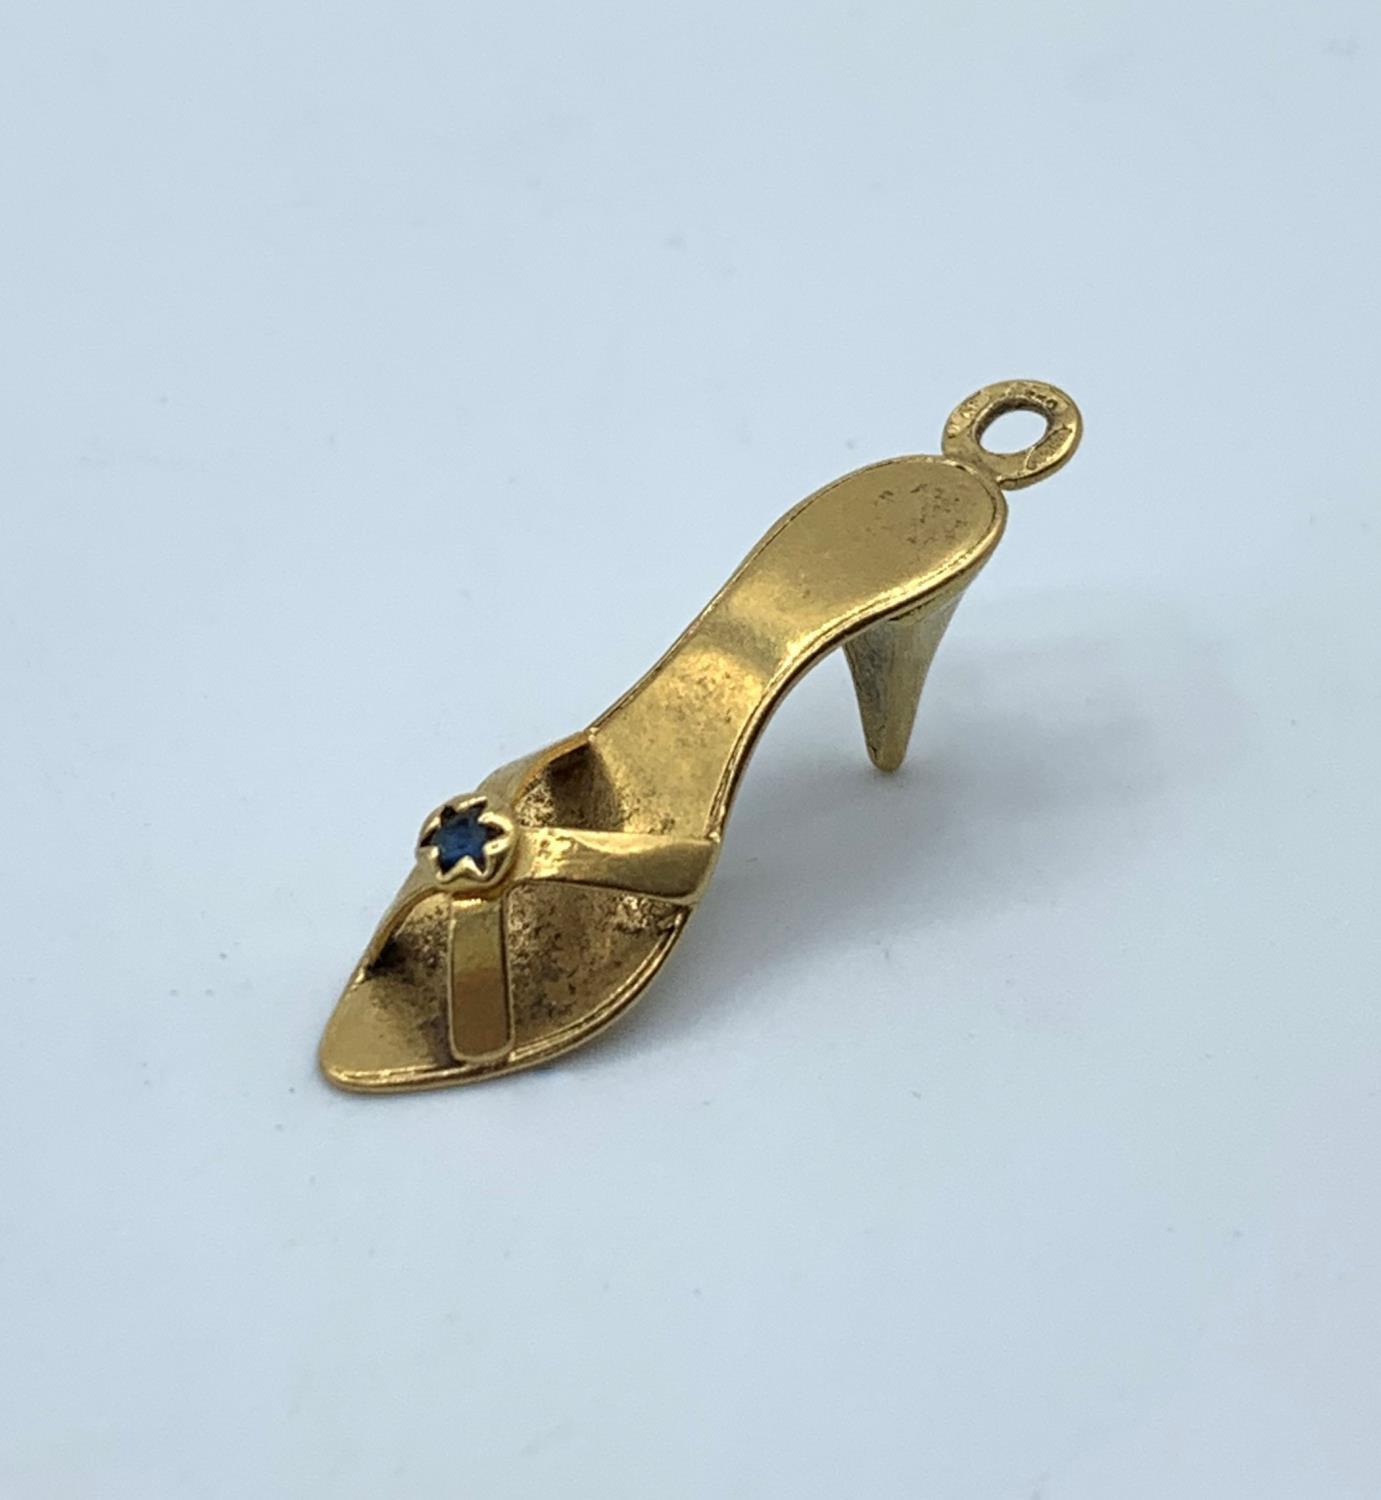 9ct Gold Shoe Charm/Pendant, weight 2.7g and 3cm long - Image 3 of 6